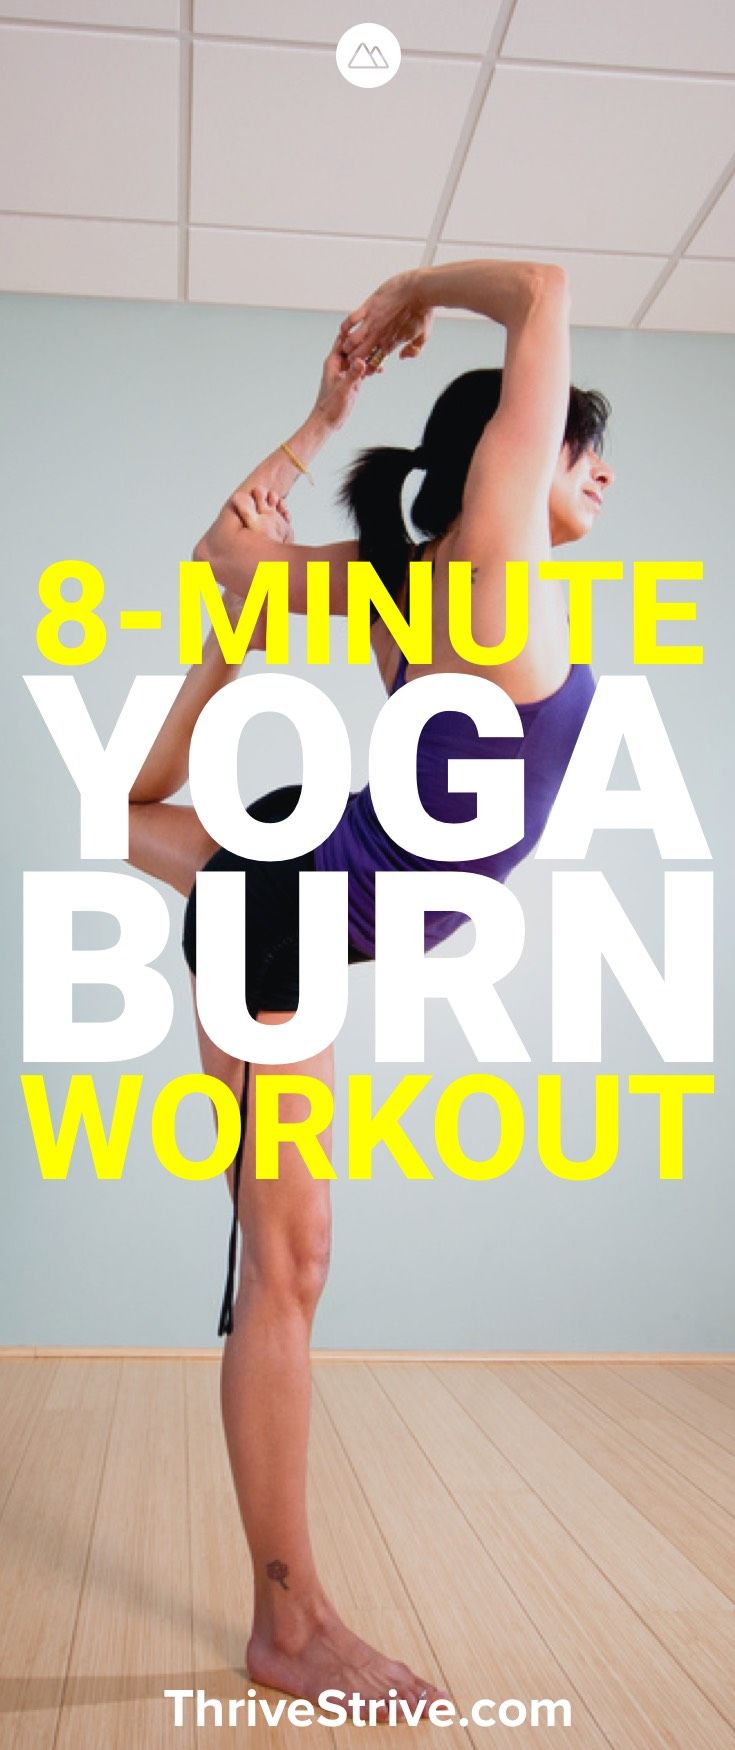 Yoga sessions don't have to be 30 minutes long to feel productive. This 8-mi...